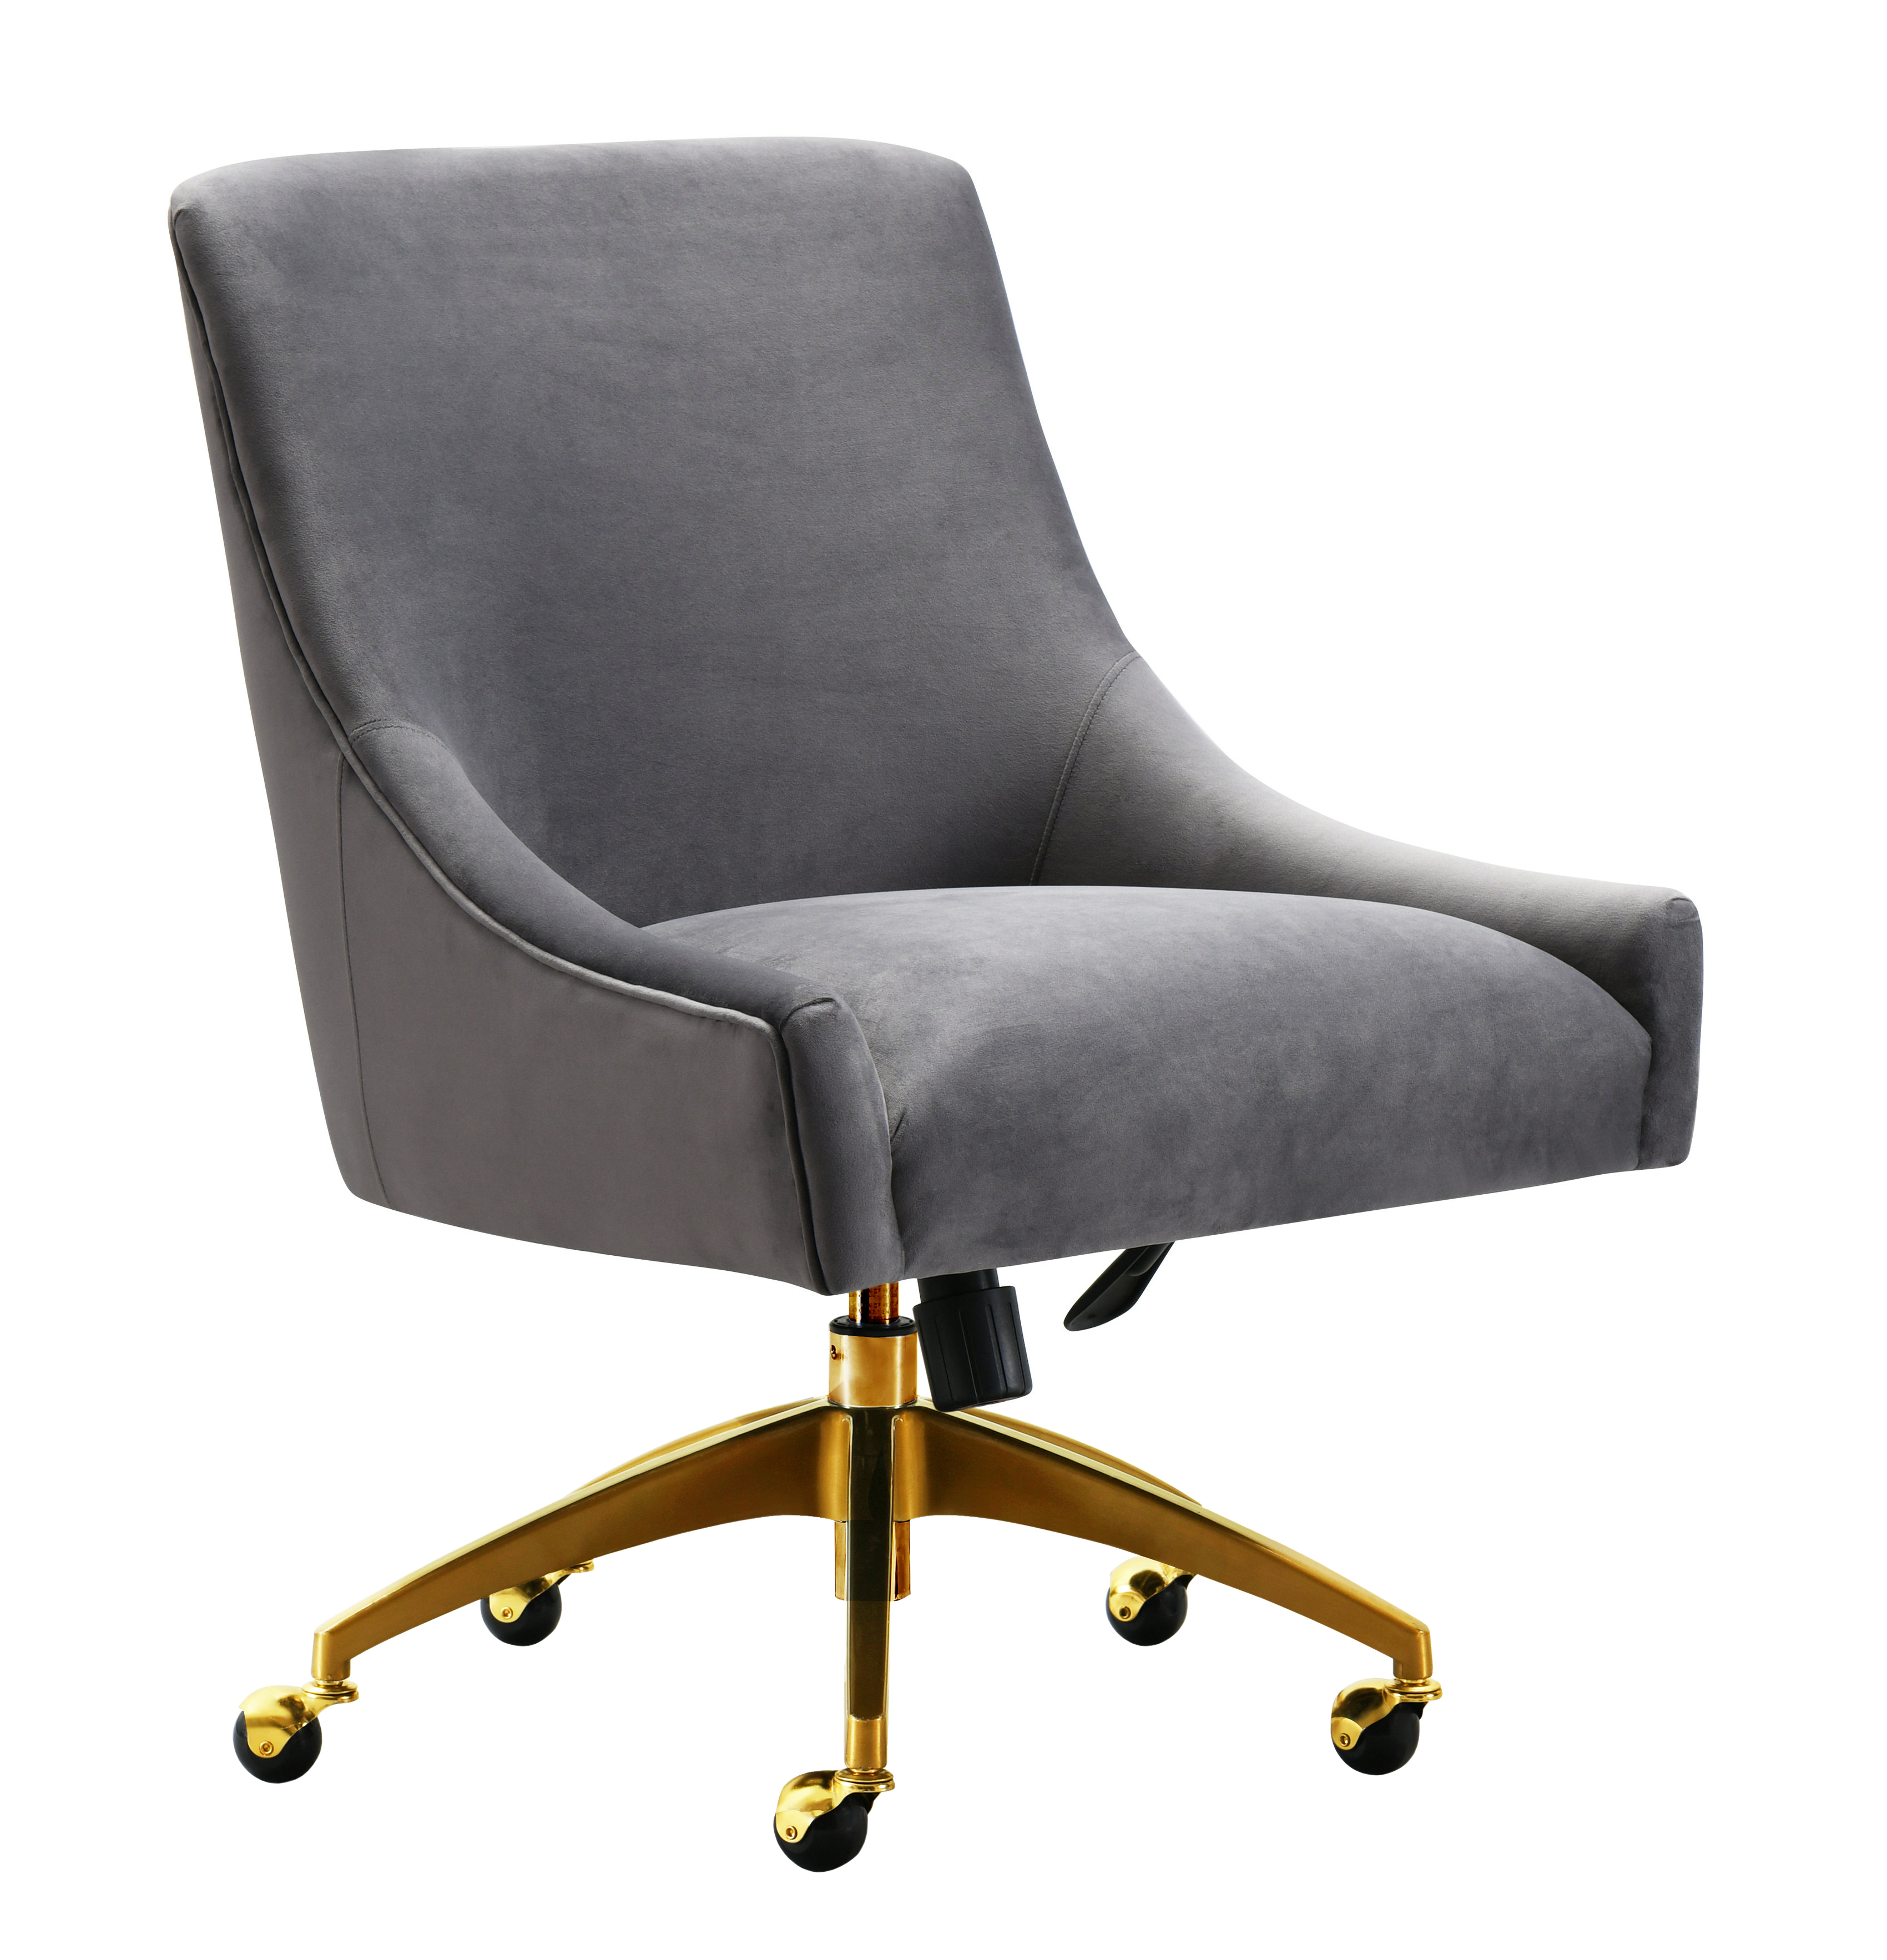 Charcoal Grey Asynchro Mechanism Office Hippo 3 Lever Swivel Desk Chair Adjustable Arms Fabric Height Adjustable Back 